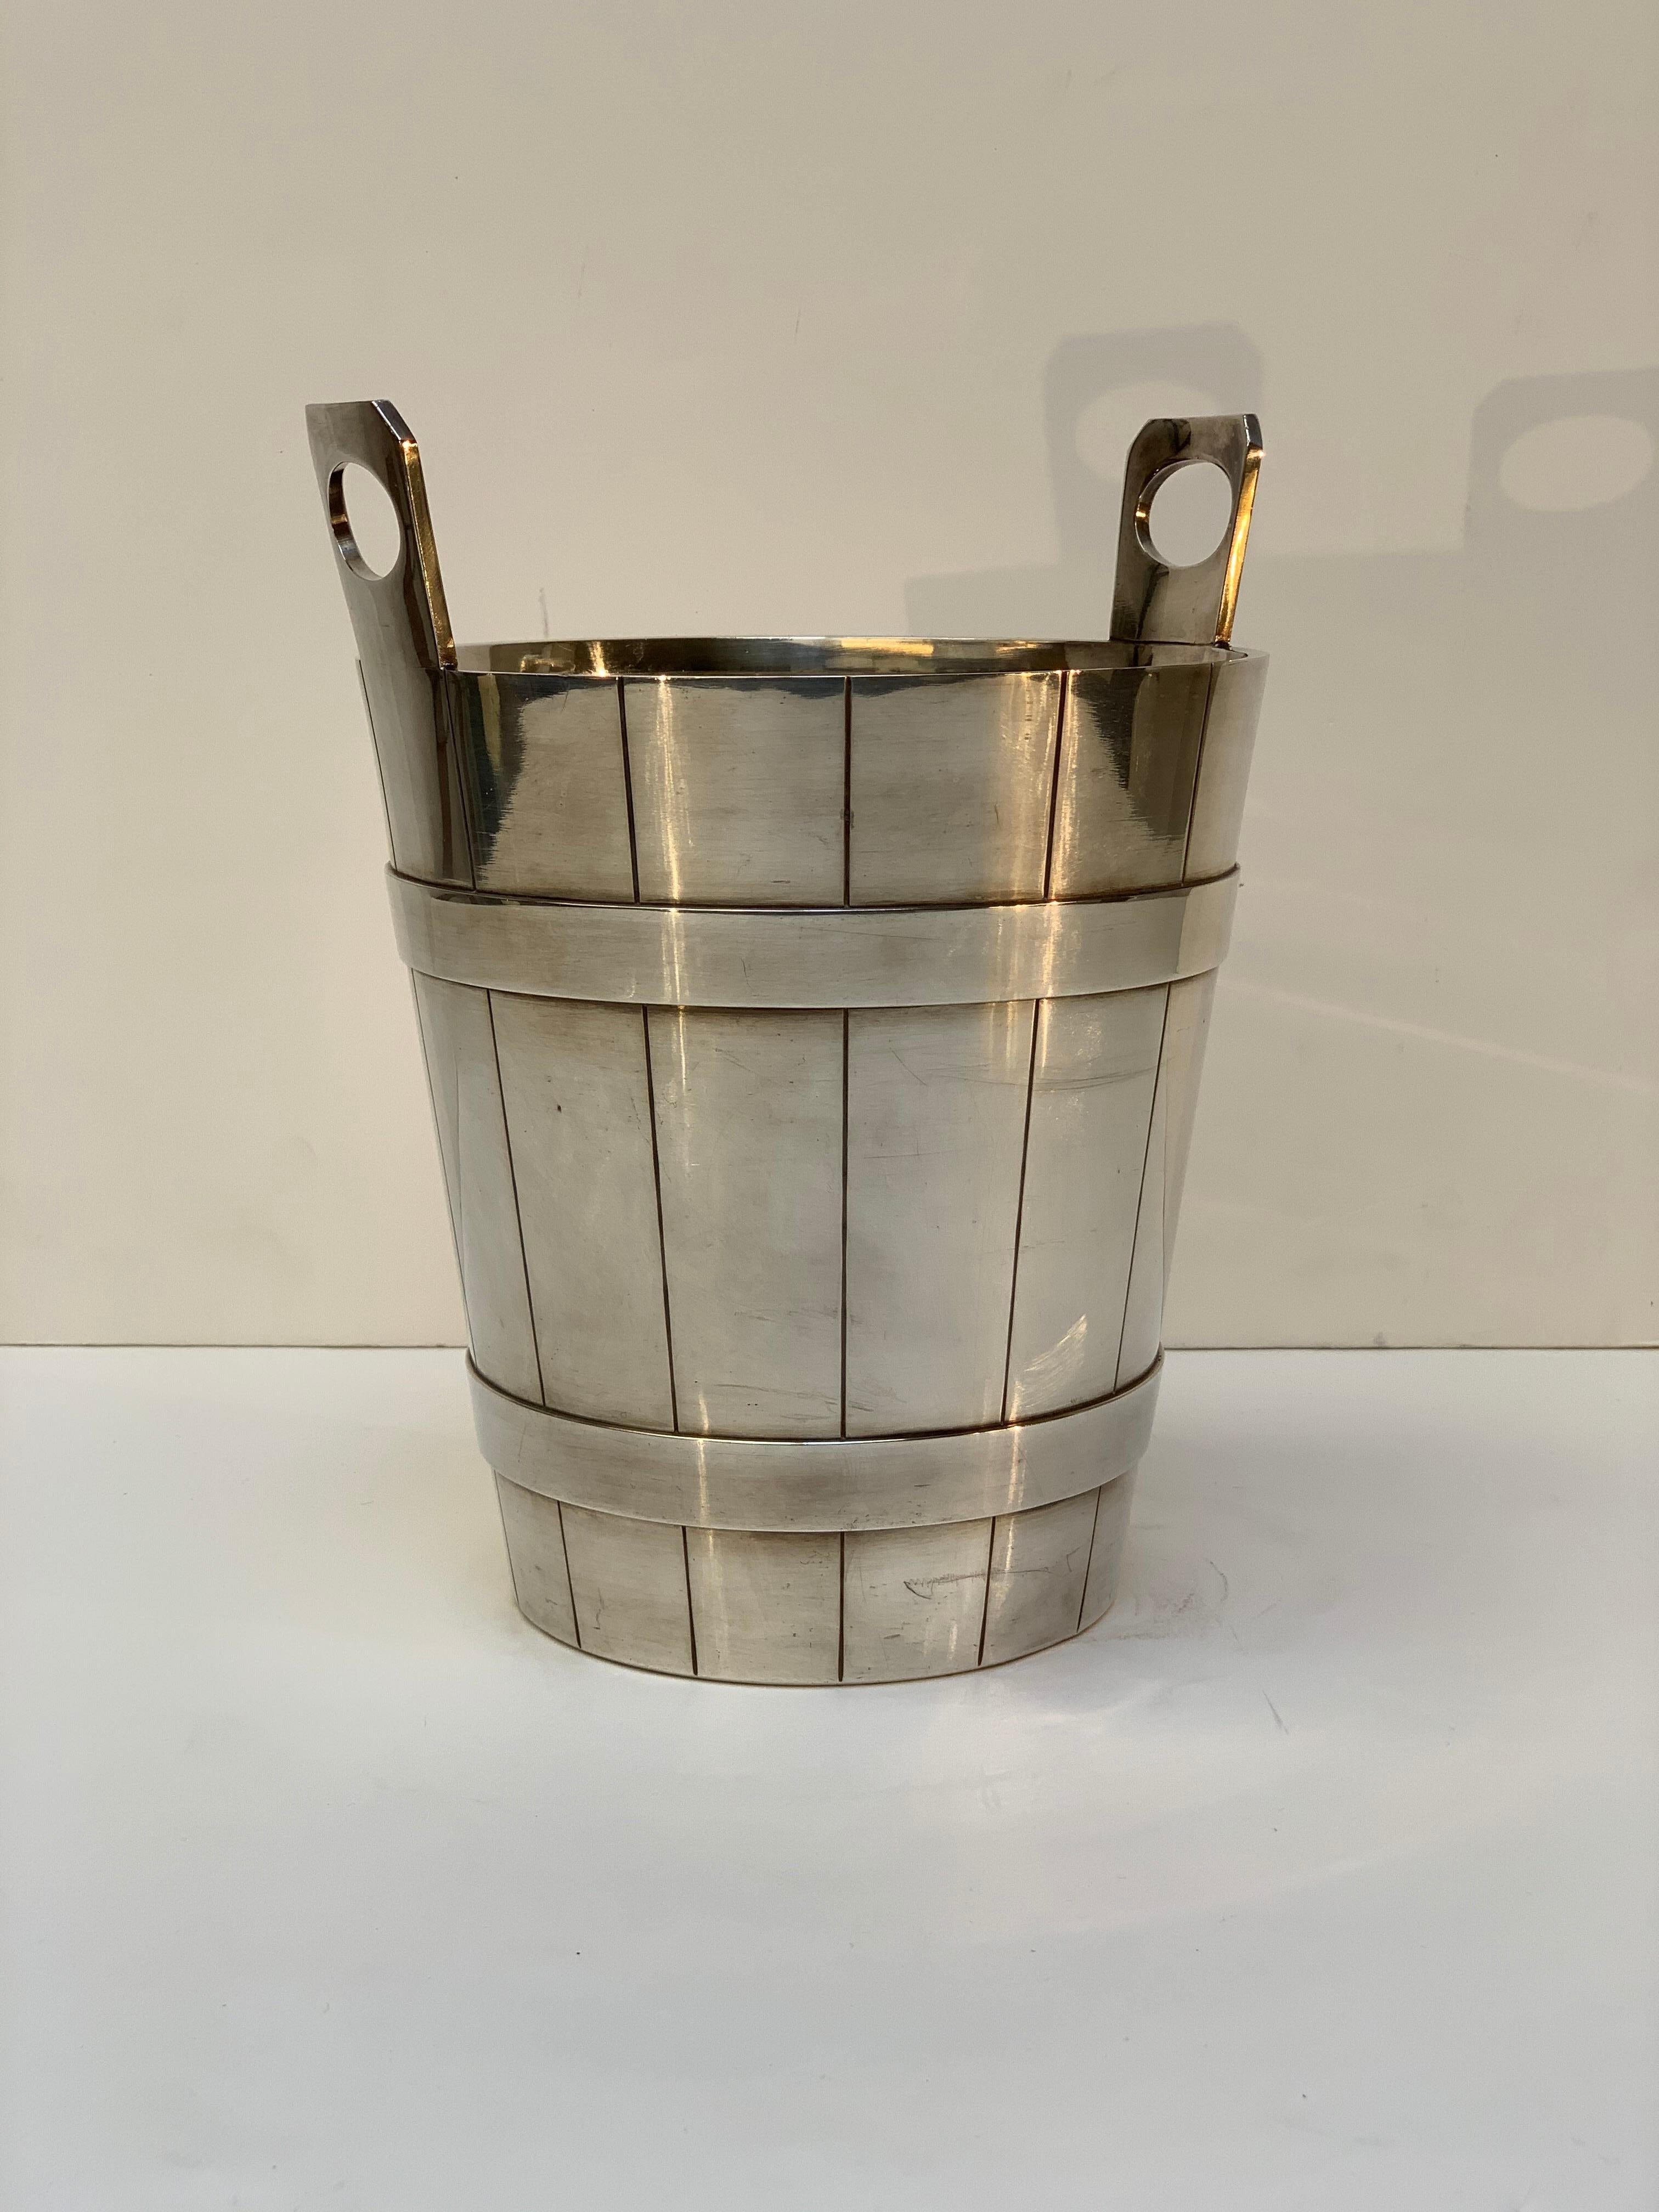 Ice bucket to keep cool wine or champagne made in Alpaca Silverplated by Calderoni Milan Italy Mid Century 1940/1950
Signed with the hallmark of the famous Manufacture.
 